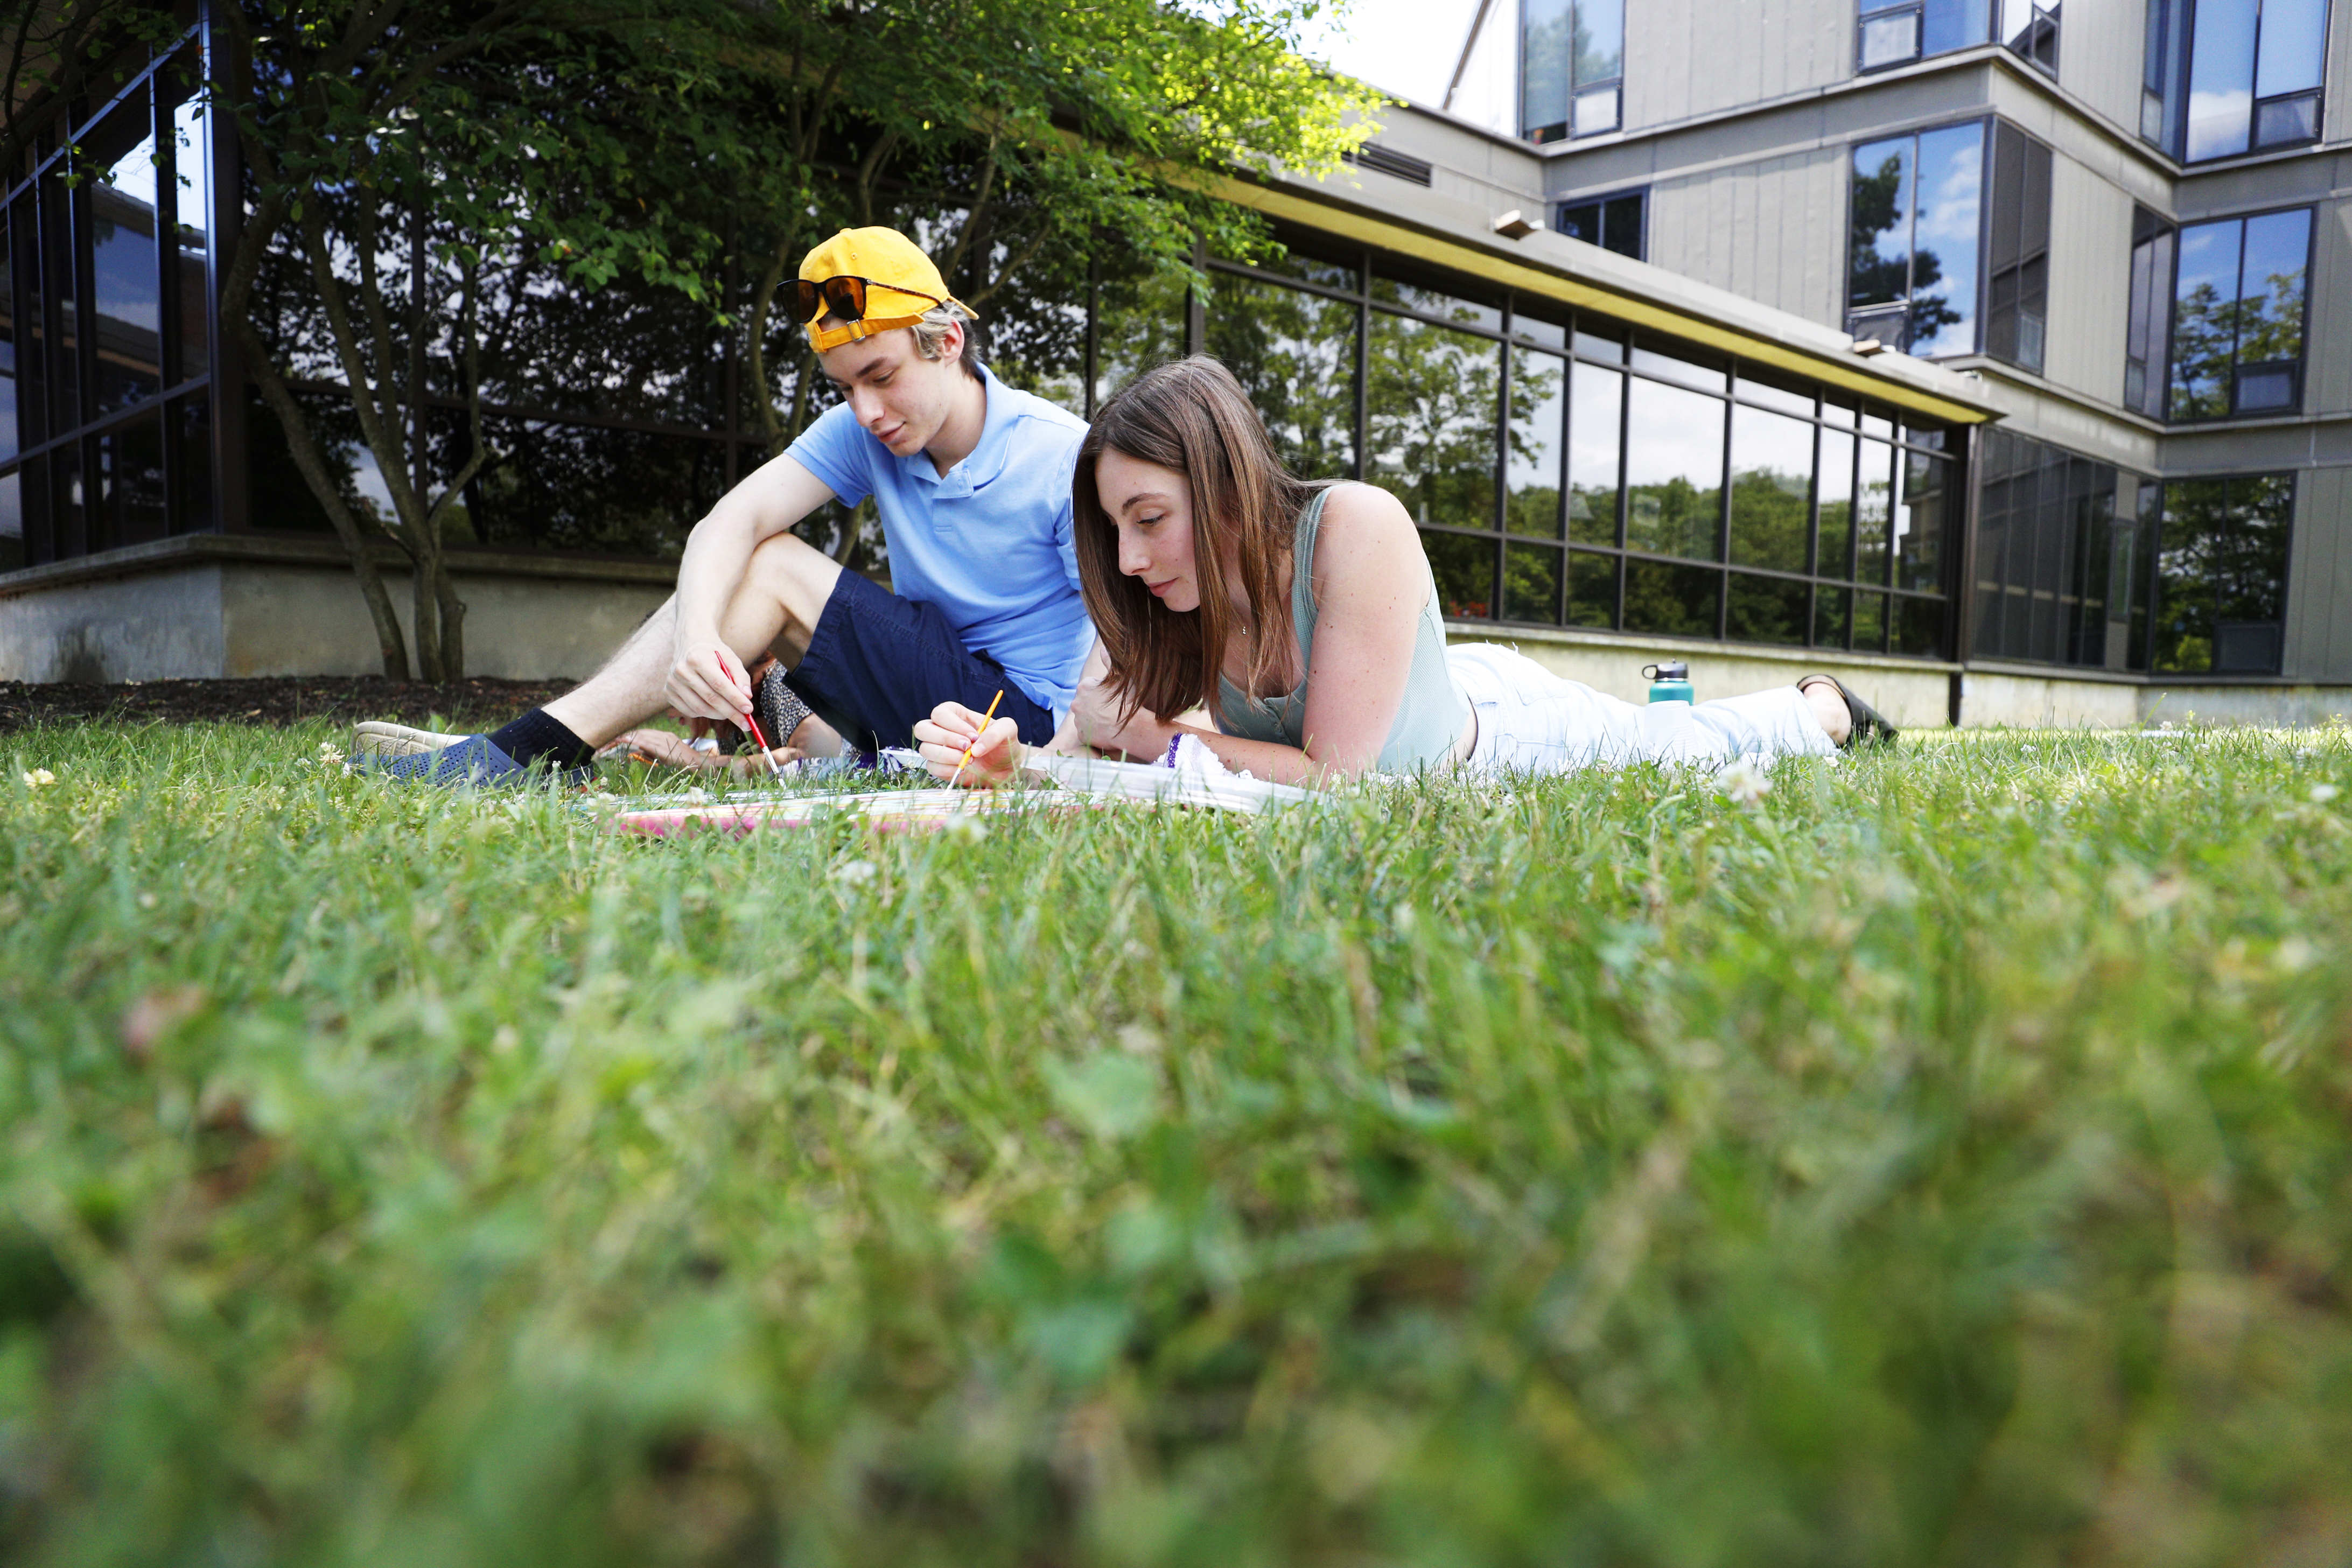 Ray East ’23 and Elizabeth Miller ’23 paint on the lawn in front of Palamountain Hall.  